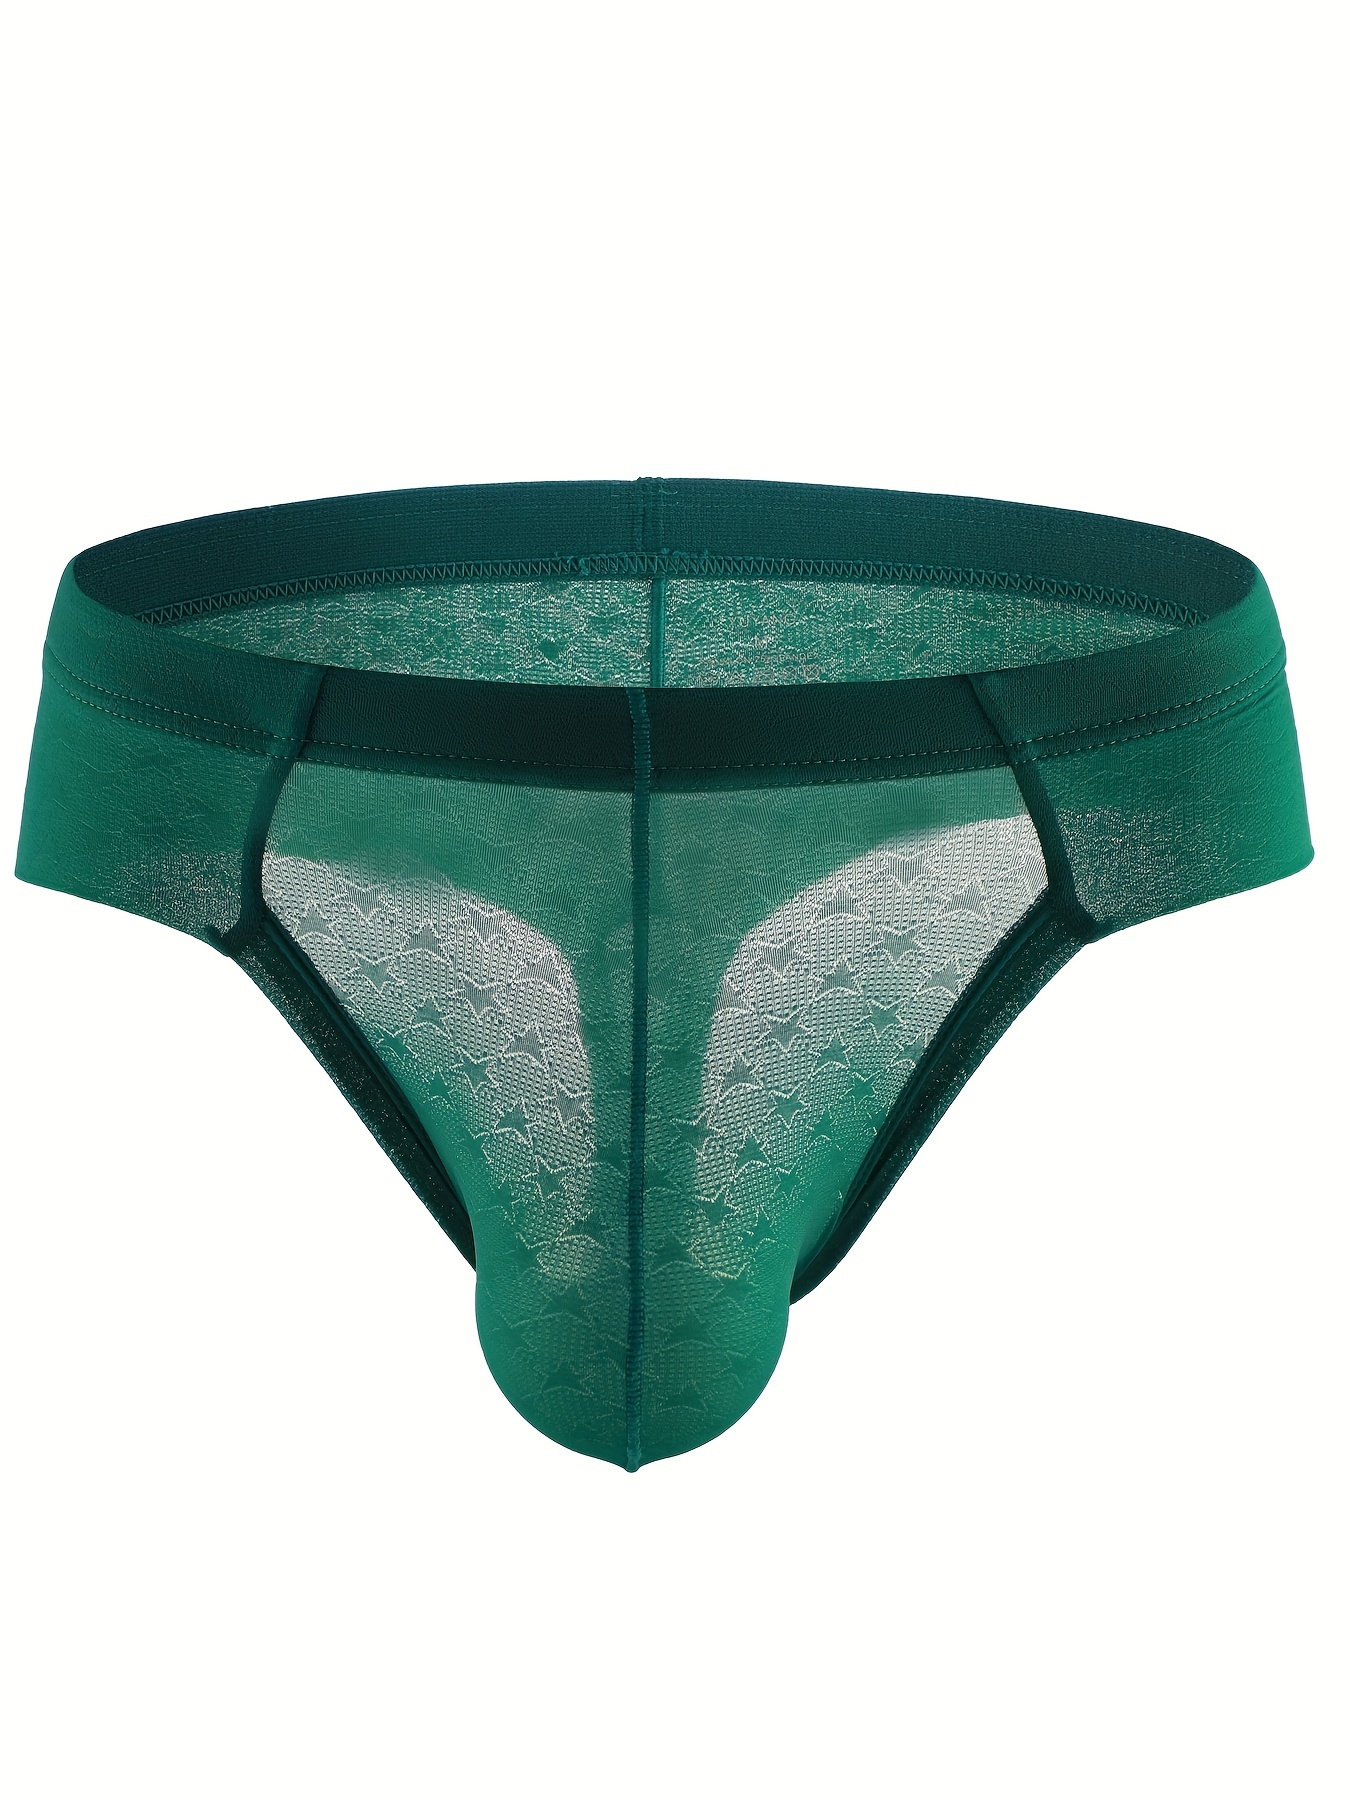 Green sexy gay mens mesh holes transparent fishnets panties underpants  underwear · Amega Fashion · Online Store Powered by Storenvy